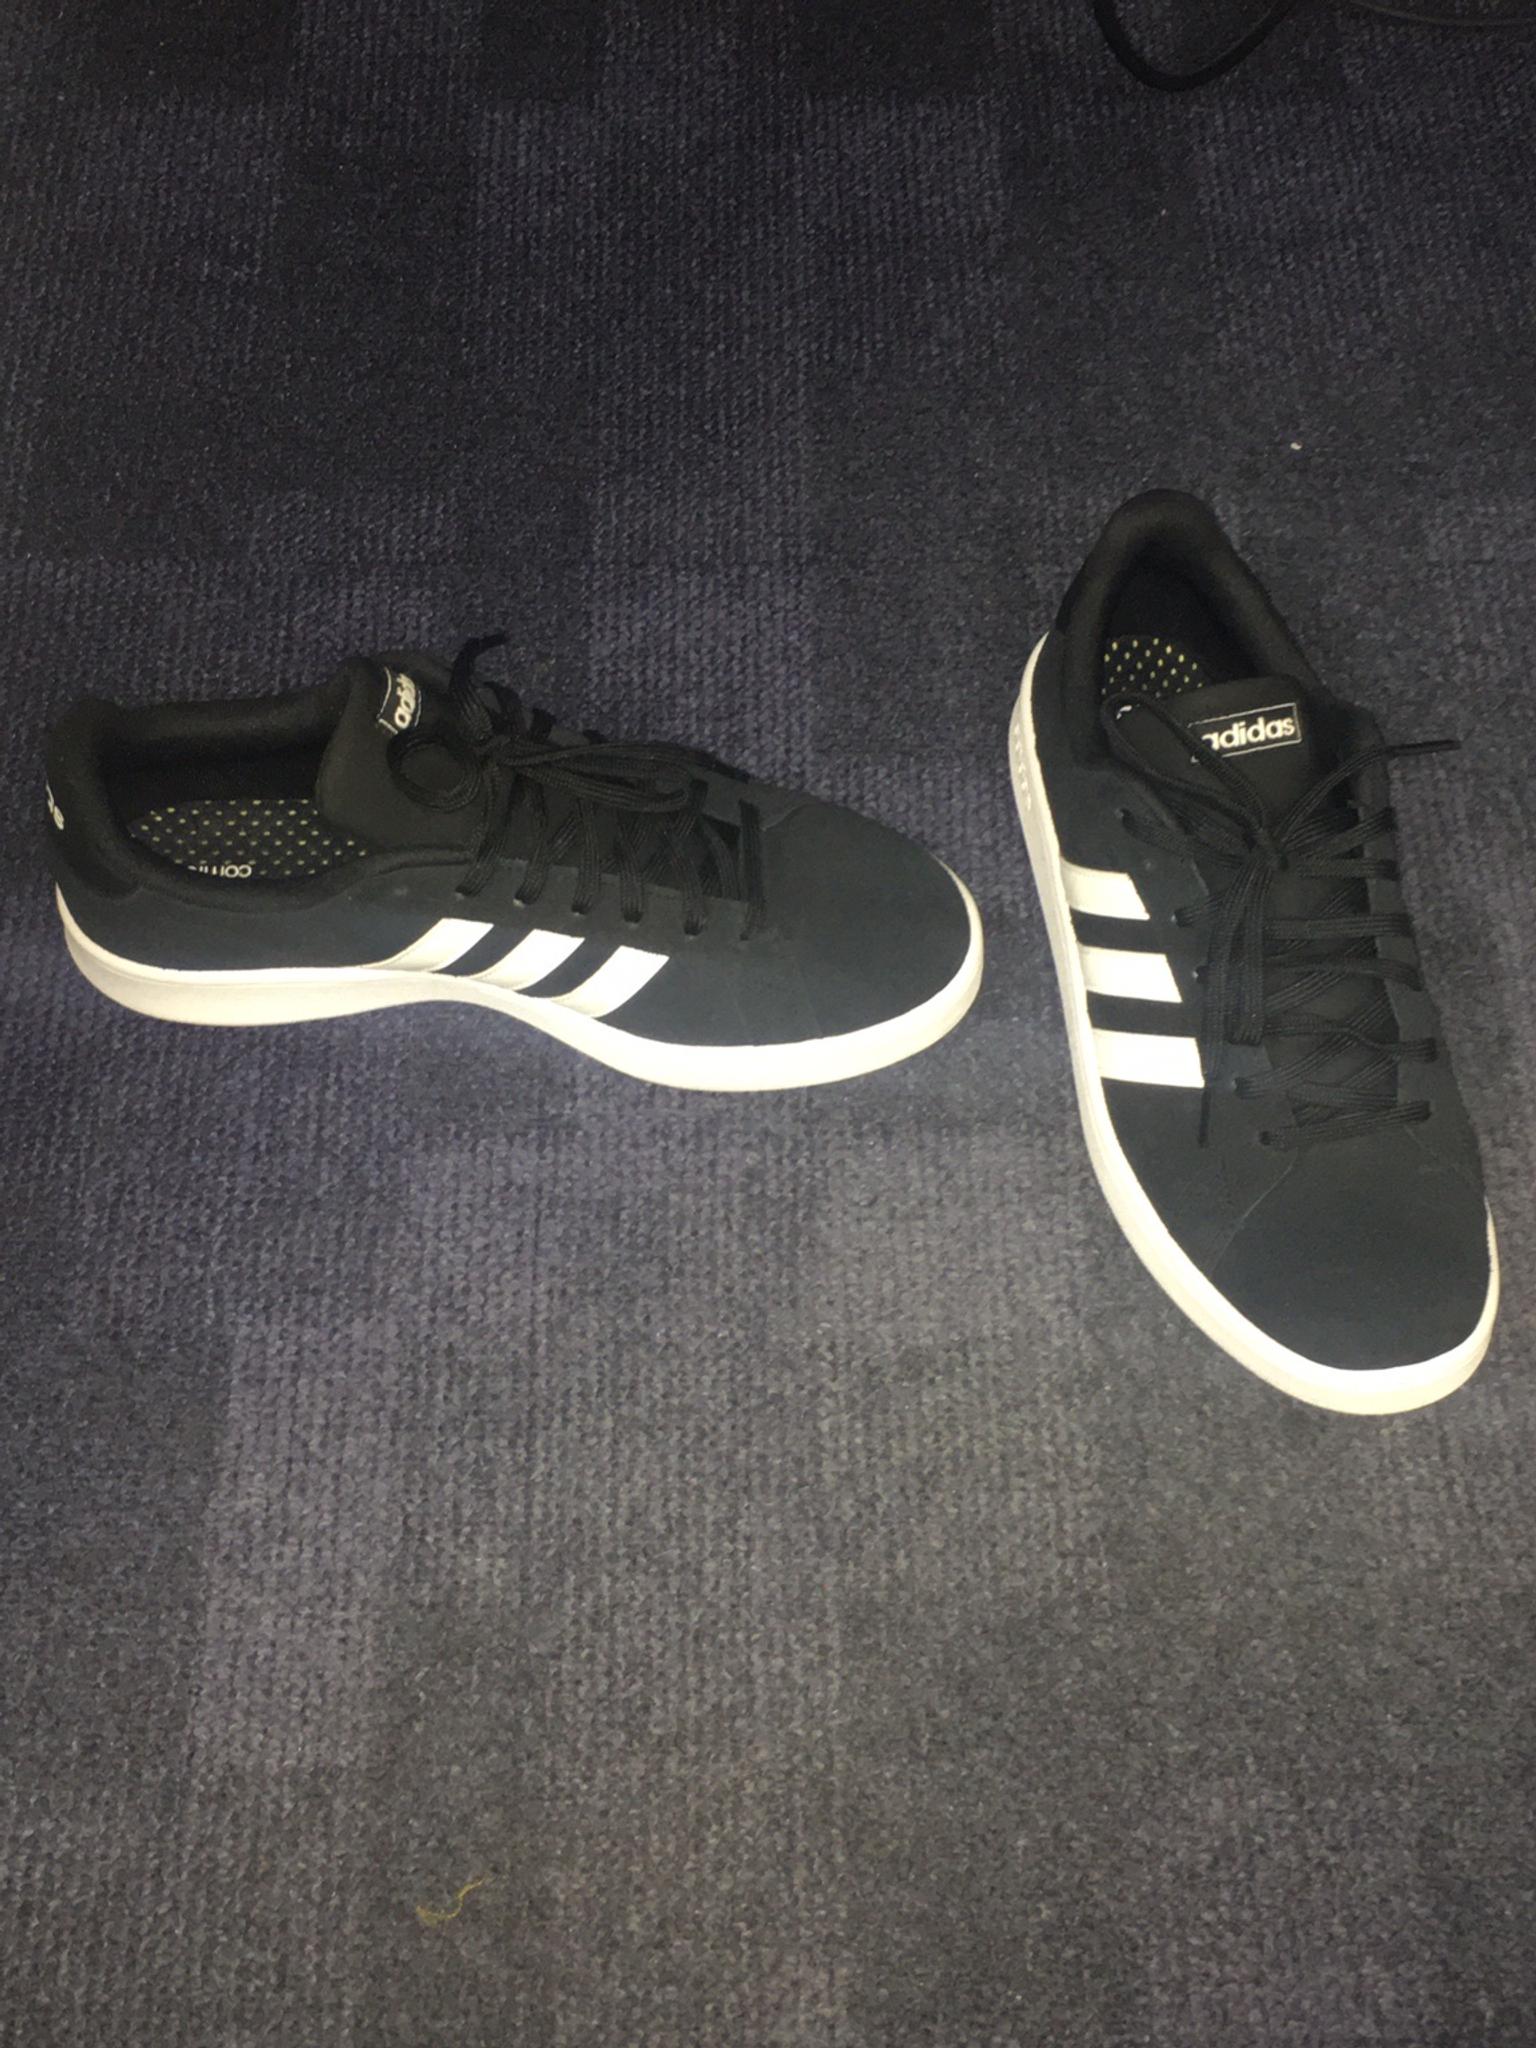 mens adidas trainers size 9